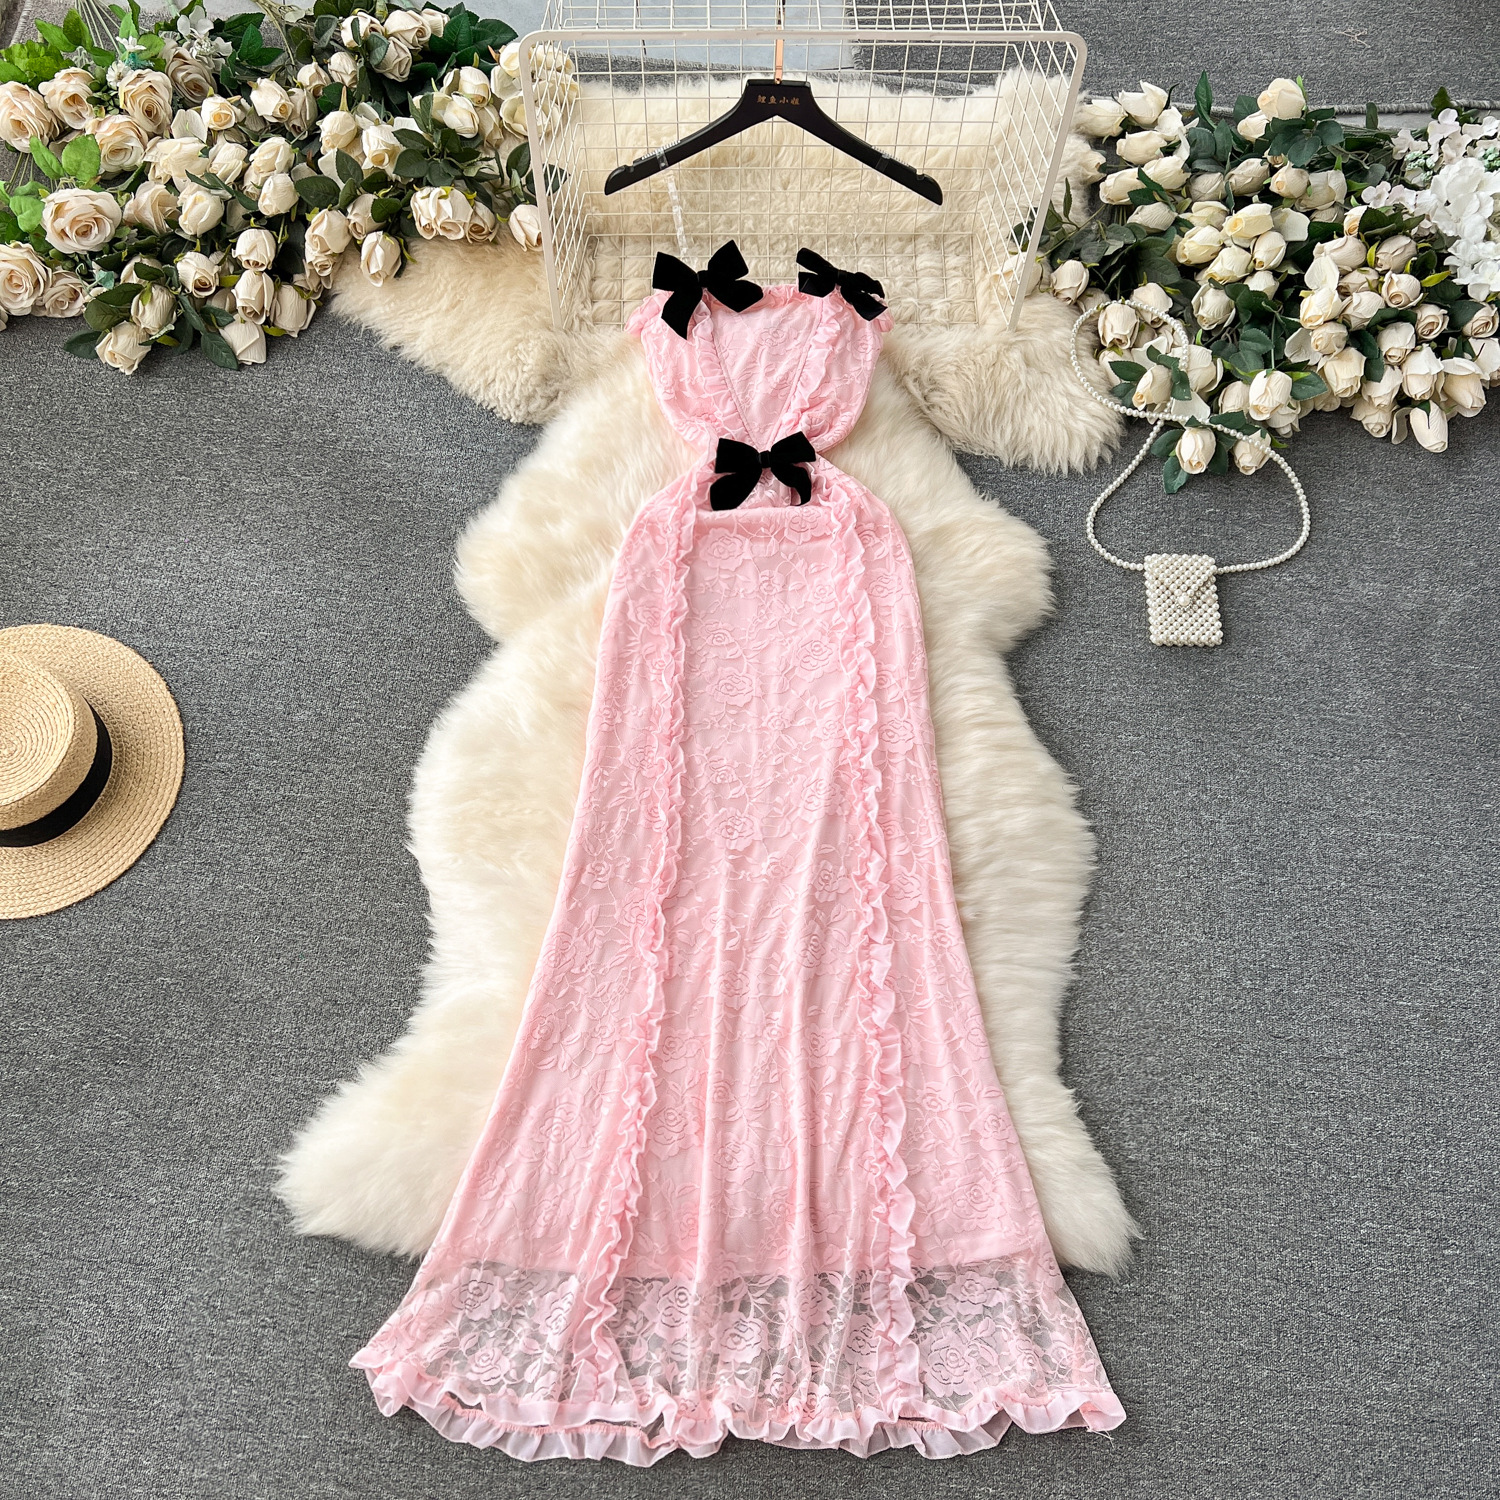 High end socialite style dress with sweet wood ear edge slim fit and long sexy strapless lace dress with bow